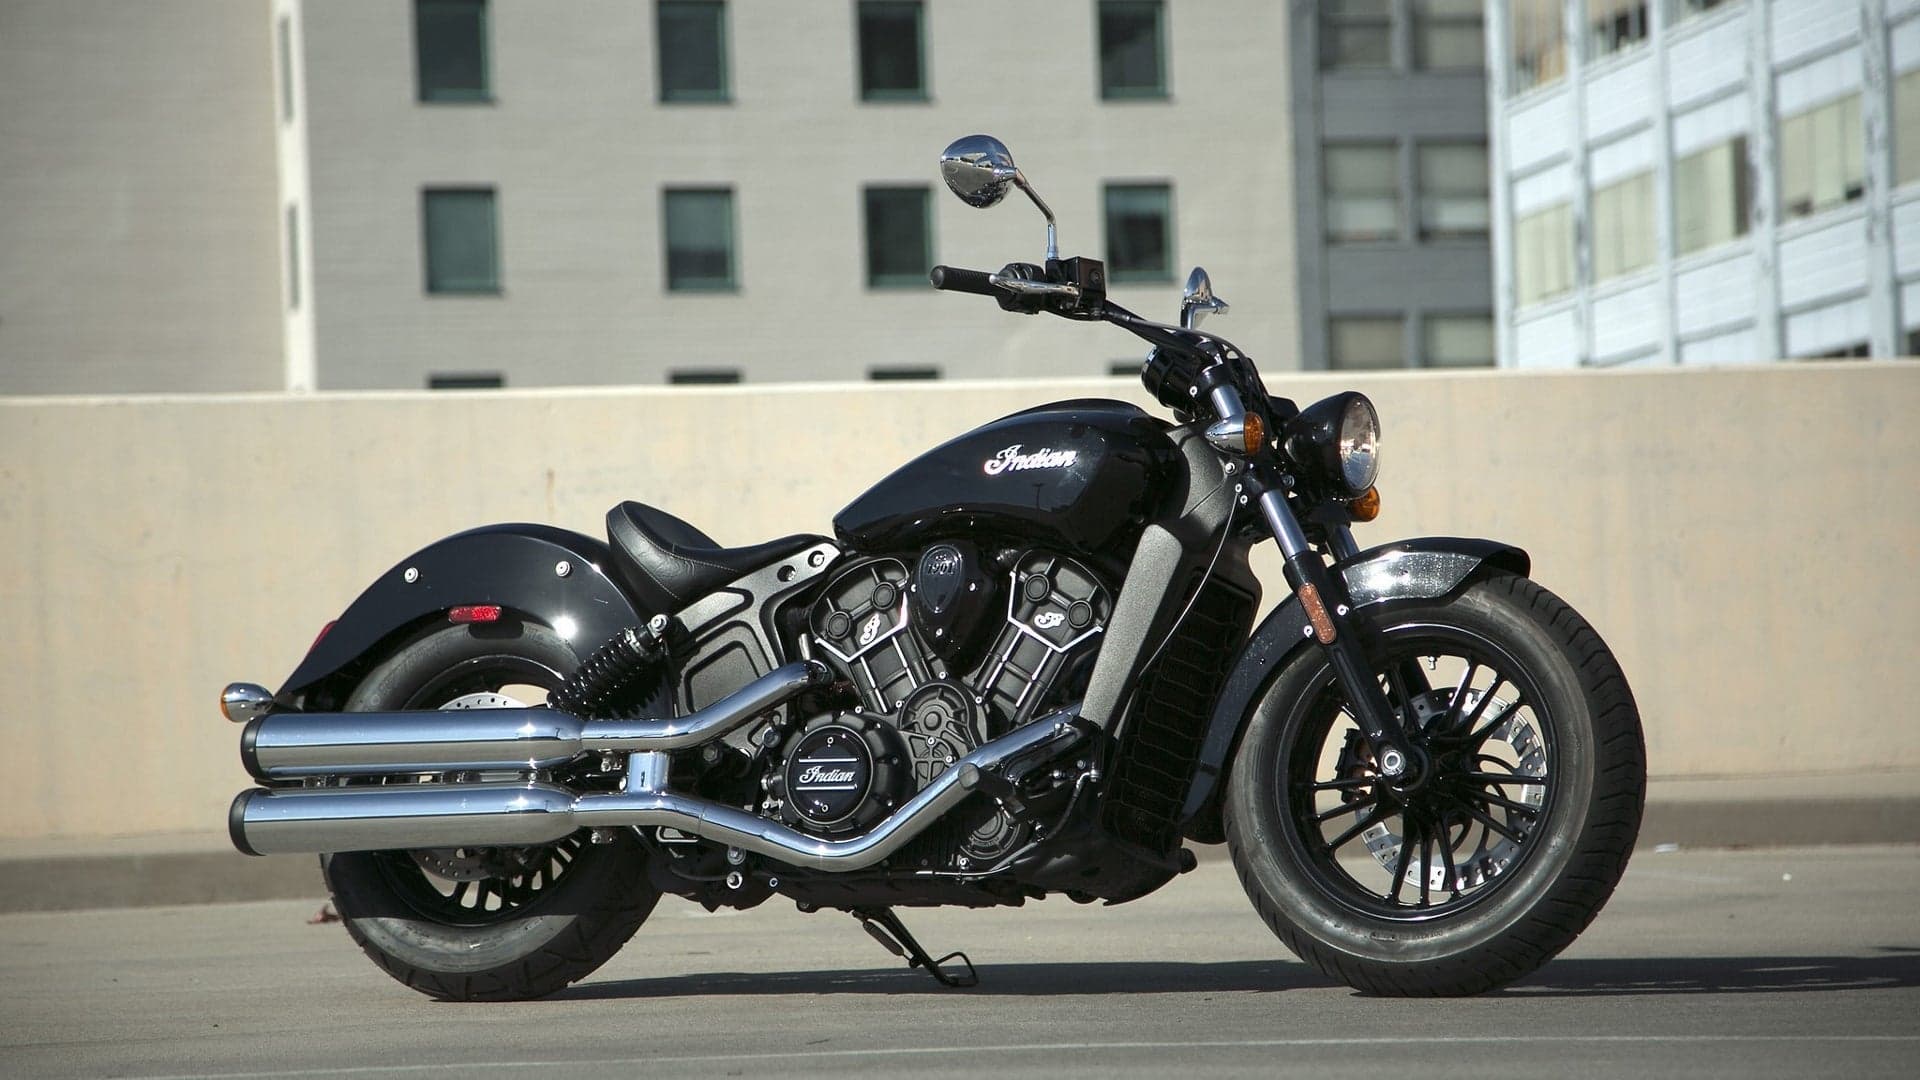 The Indian Scout Sixty Is a Cruiser Gateway Drug